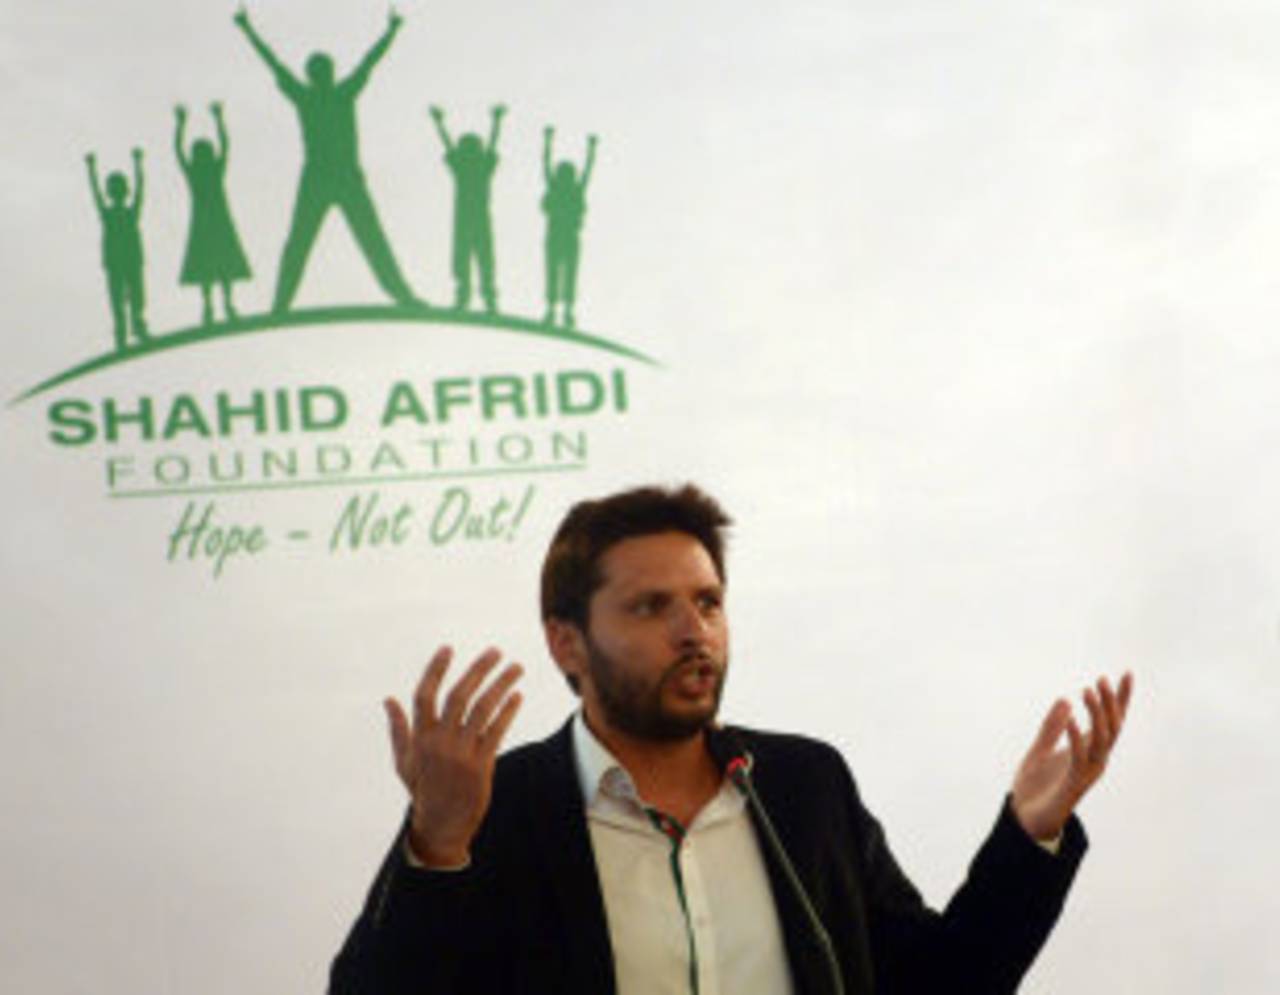 Shahid Afridi addresses the media during the launch of his charity foundation, Karachi, June 27, 2014